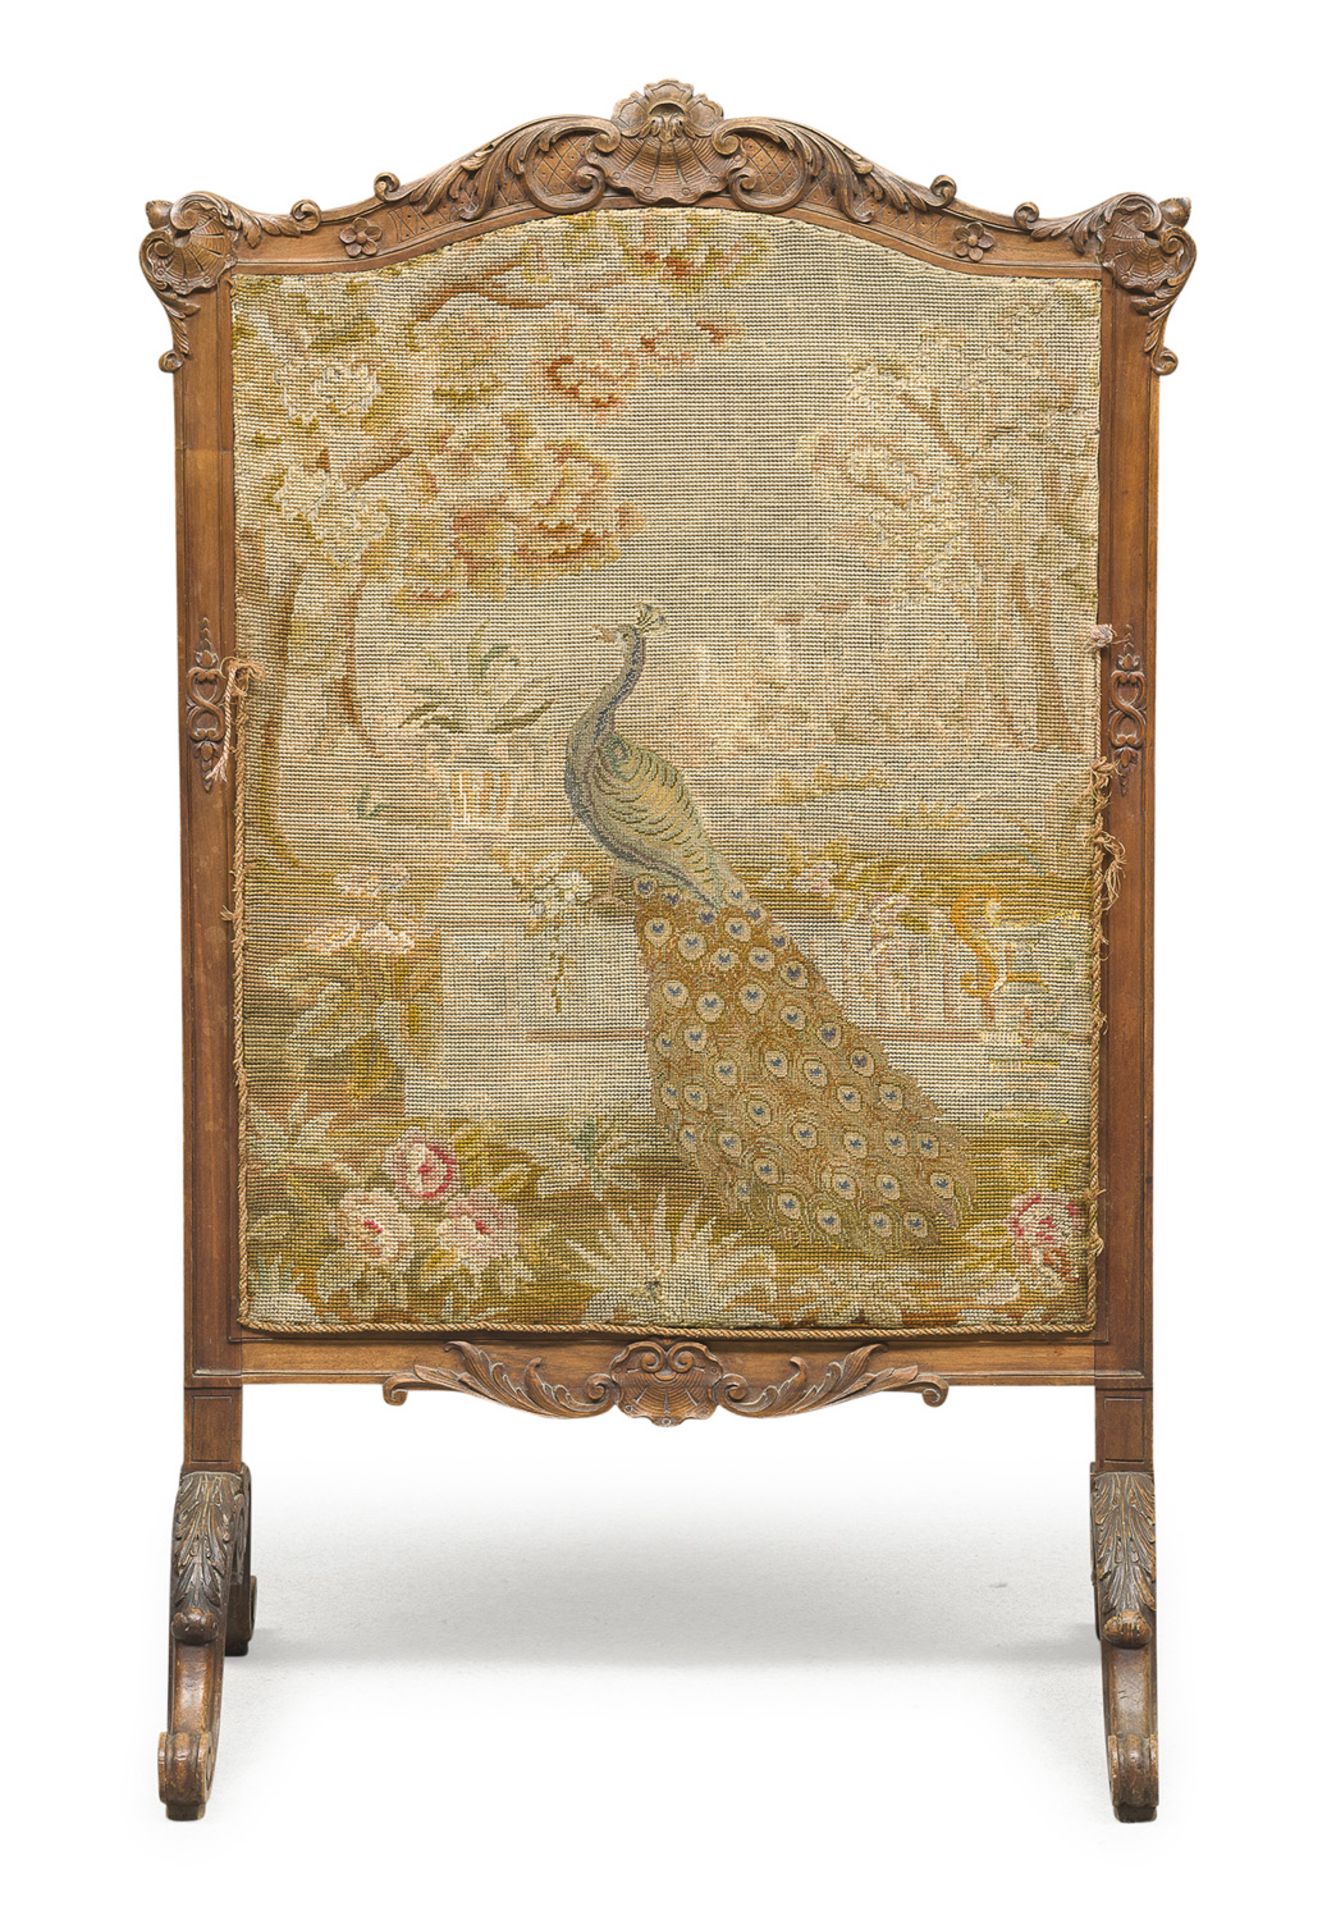 SCREEN WITH TAPESTRY PROBABLY FRANCE 19TH CENTURY